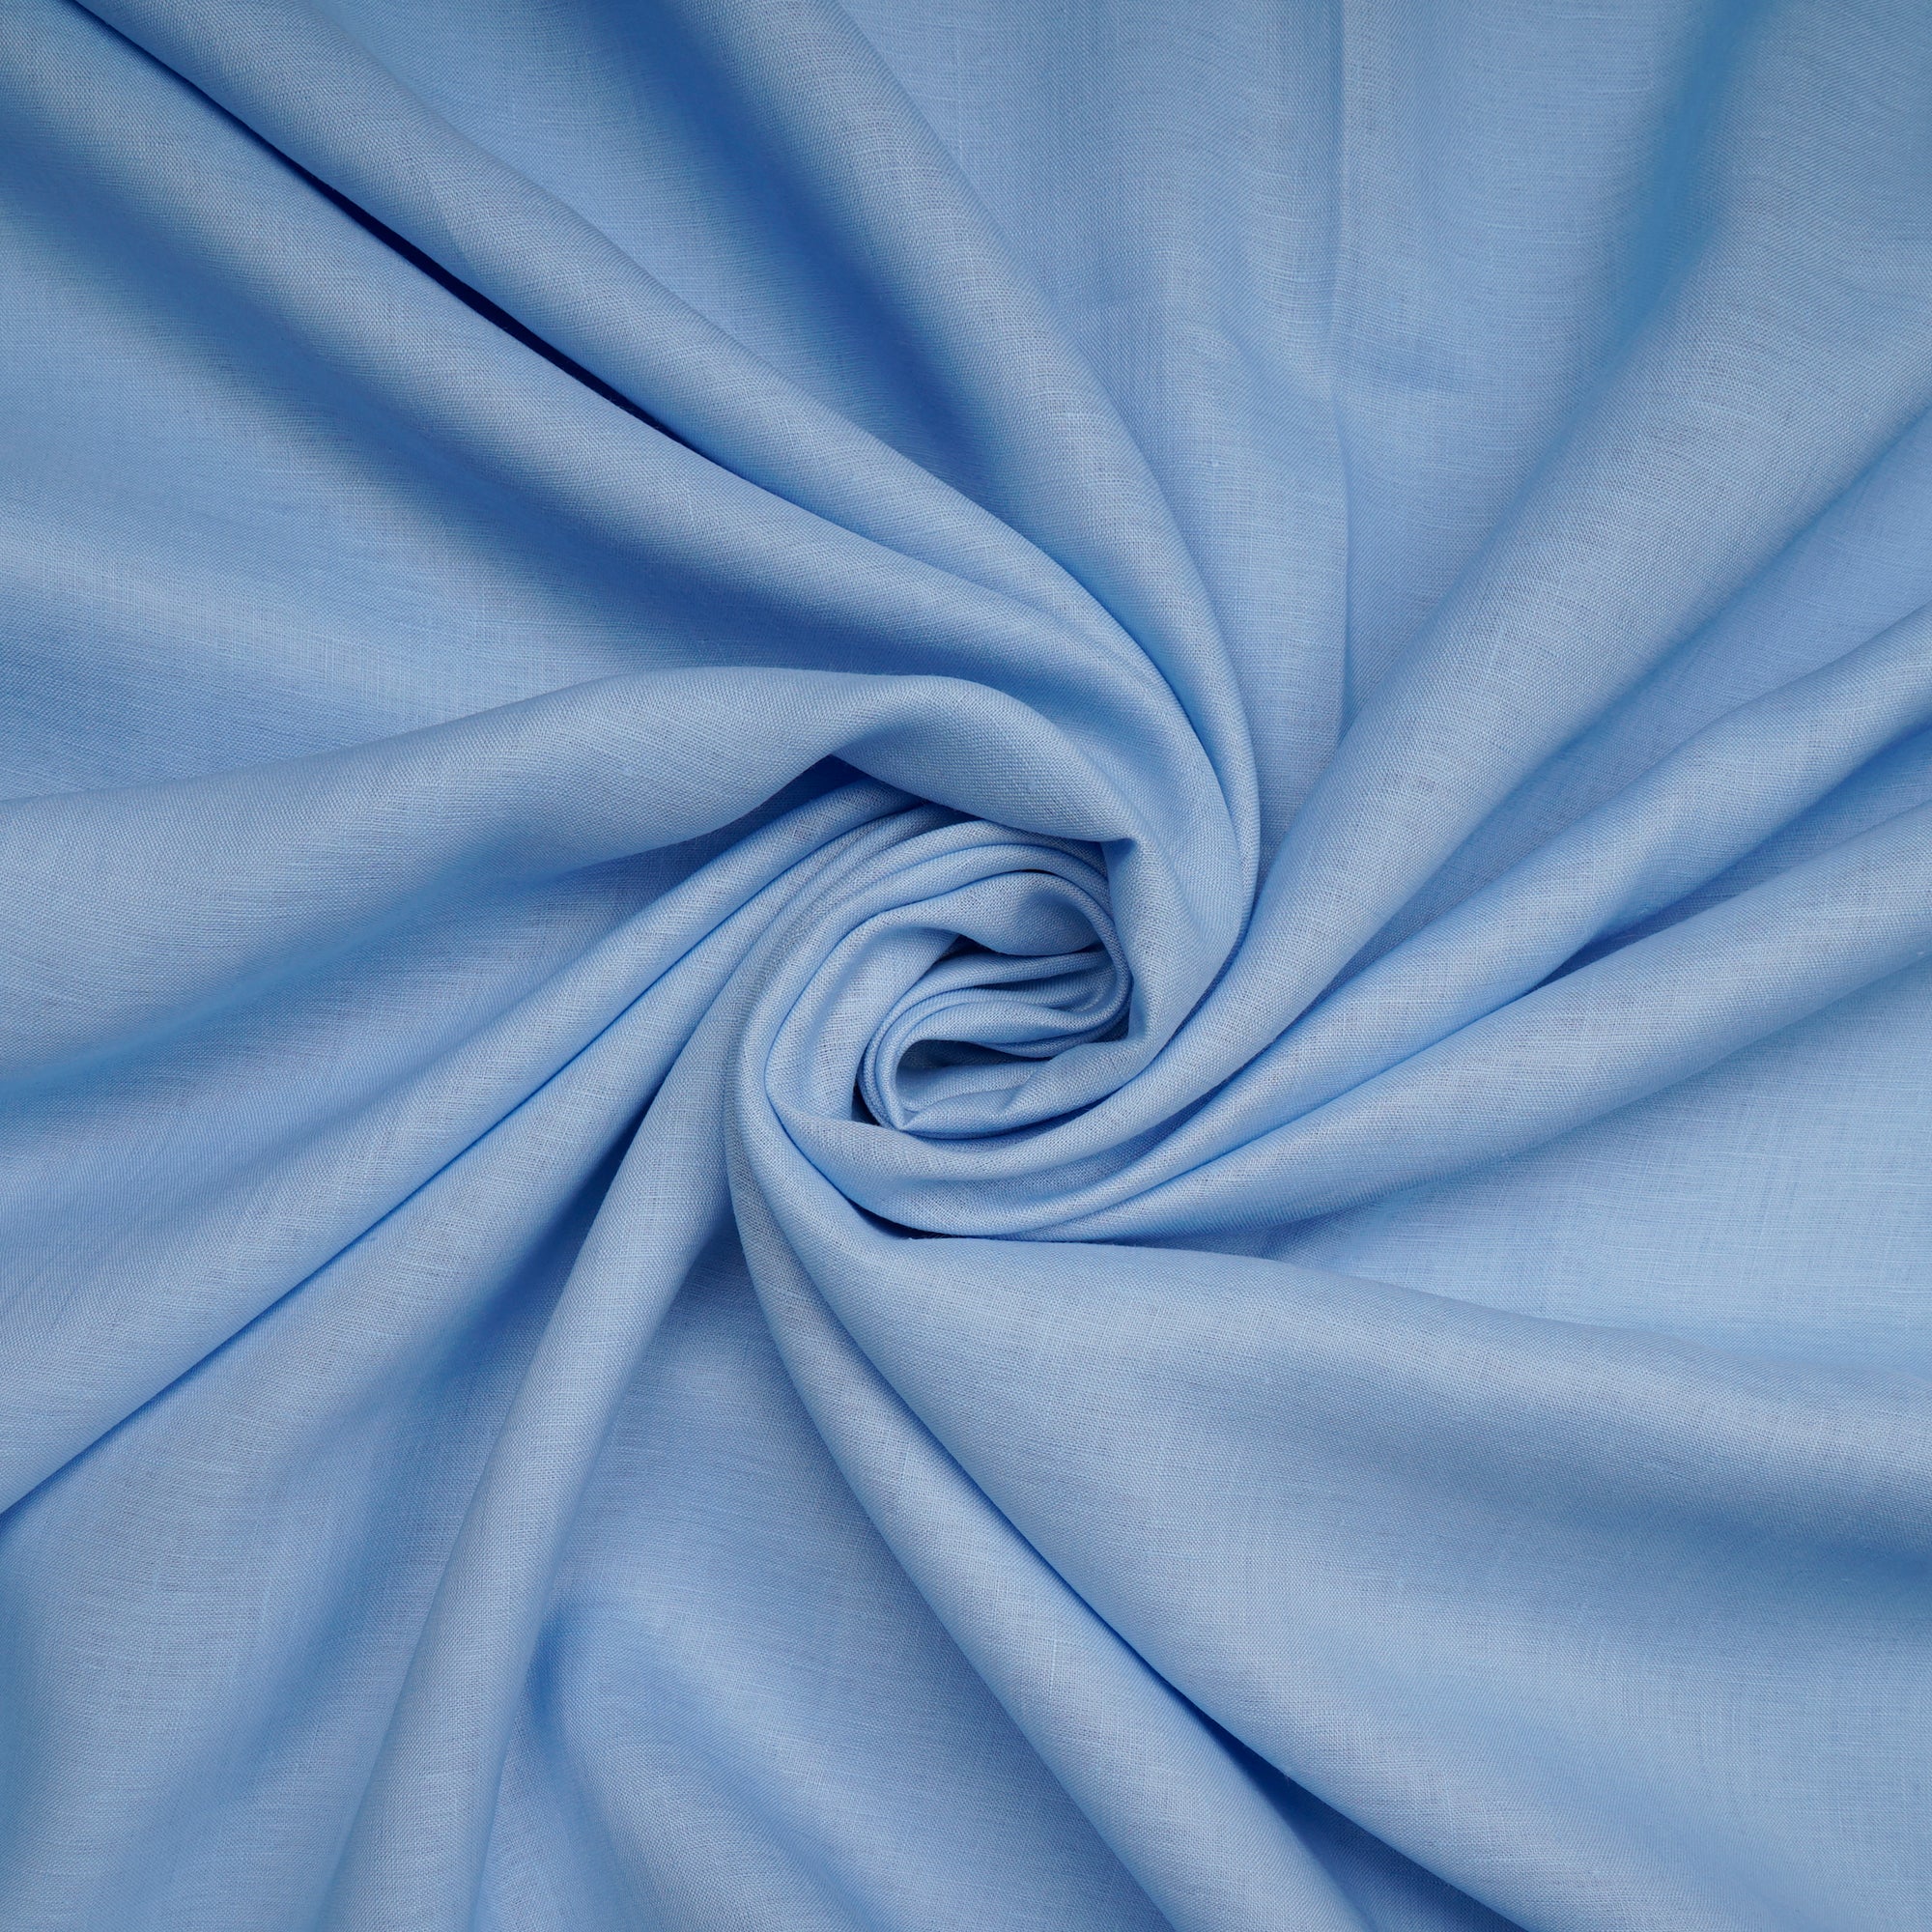 Blue Bell Dyed Pure Linen Fabric